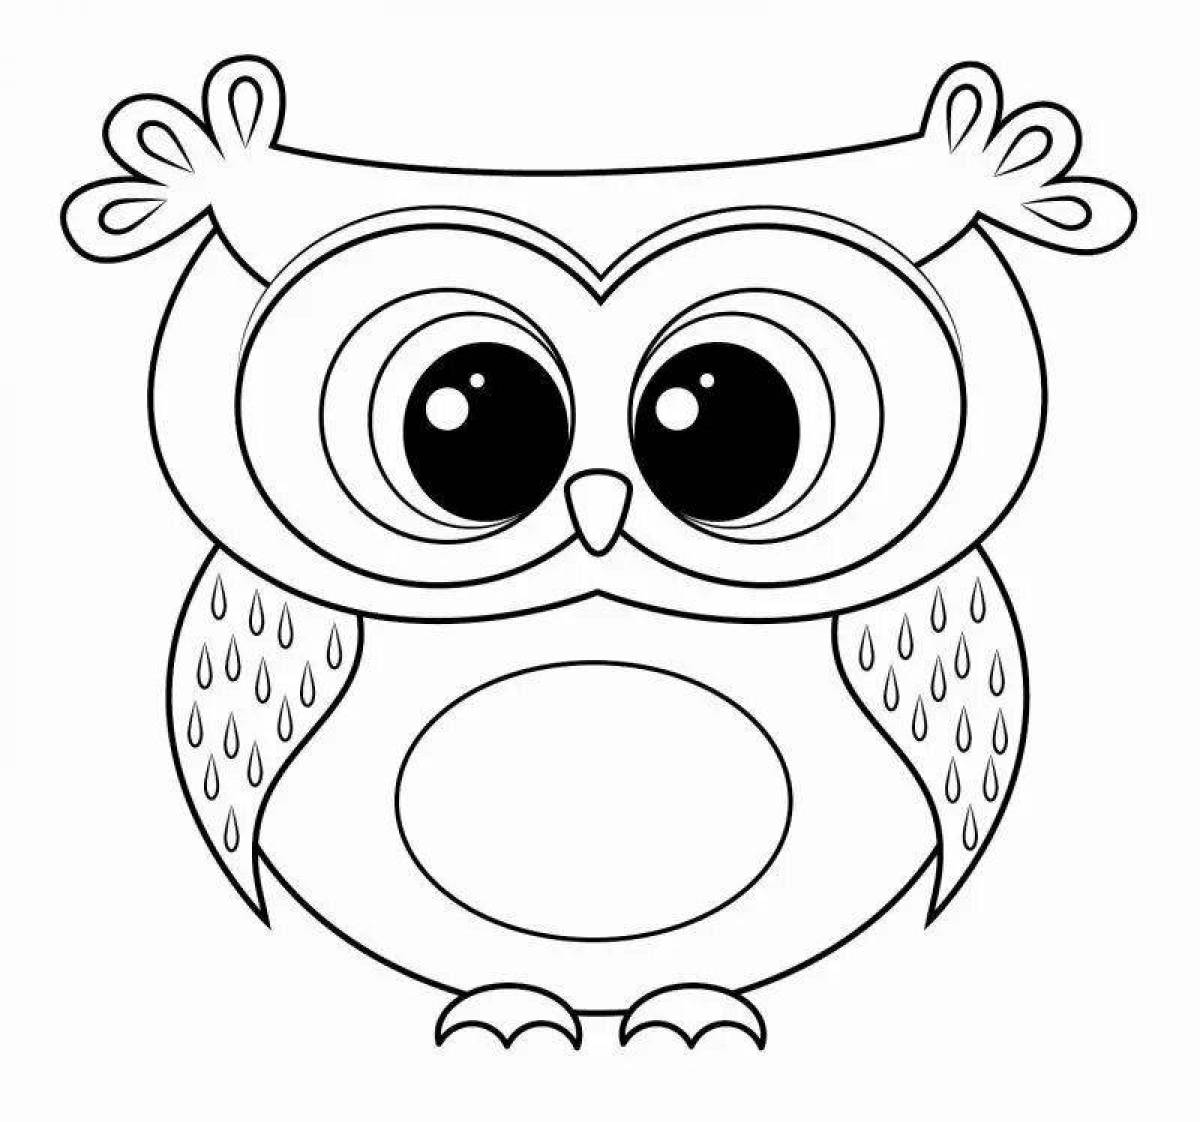 Bright owl coloring book